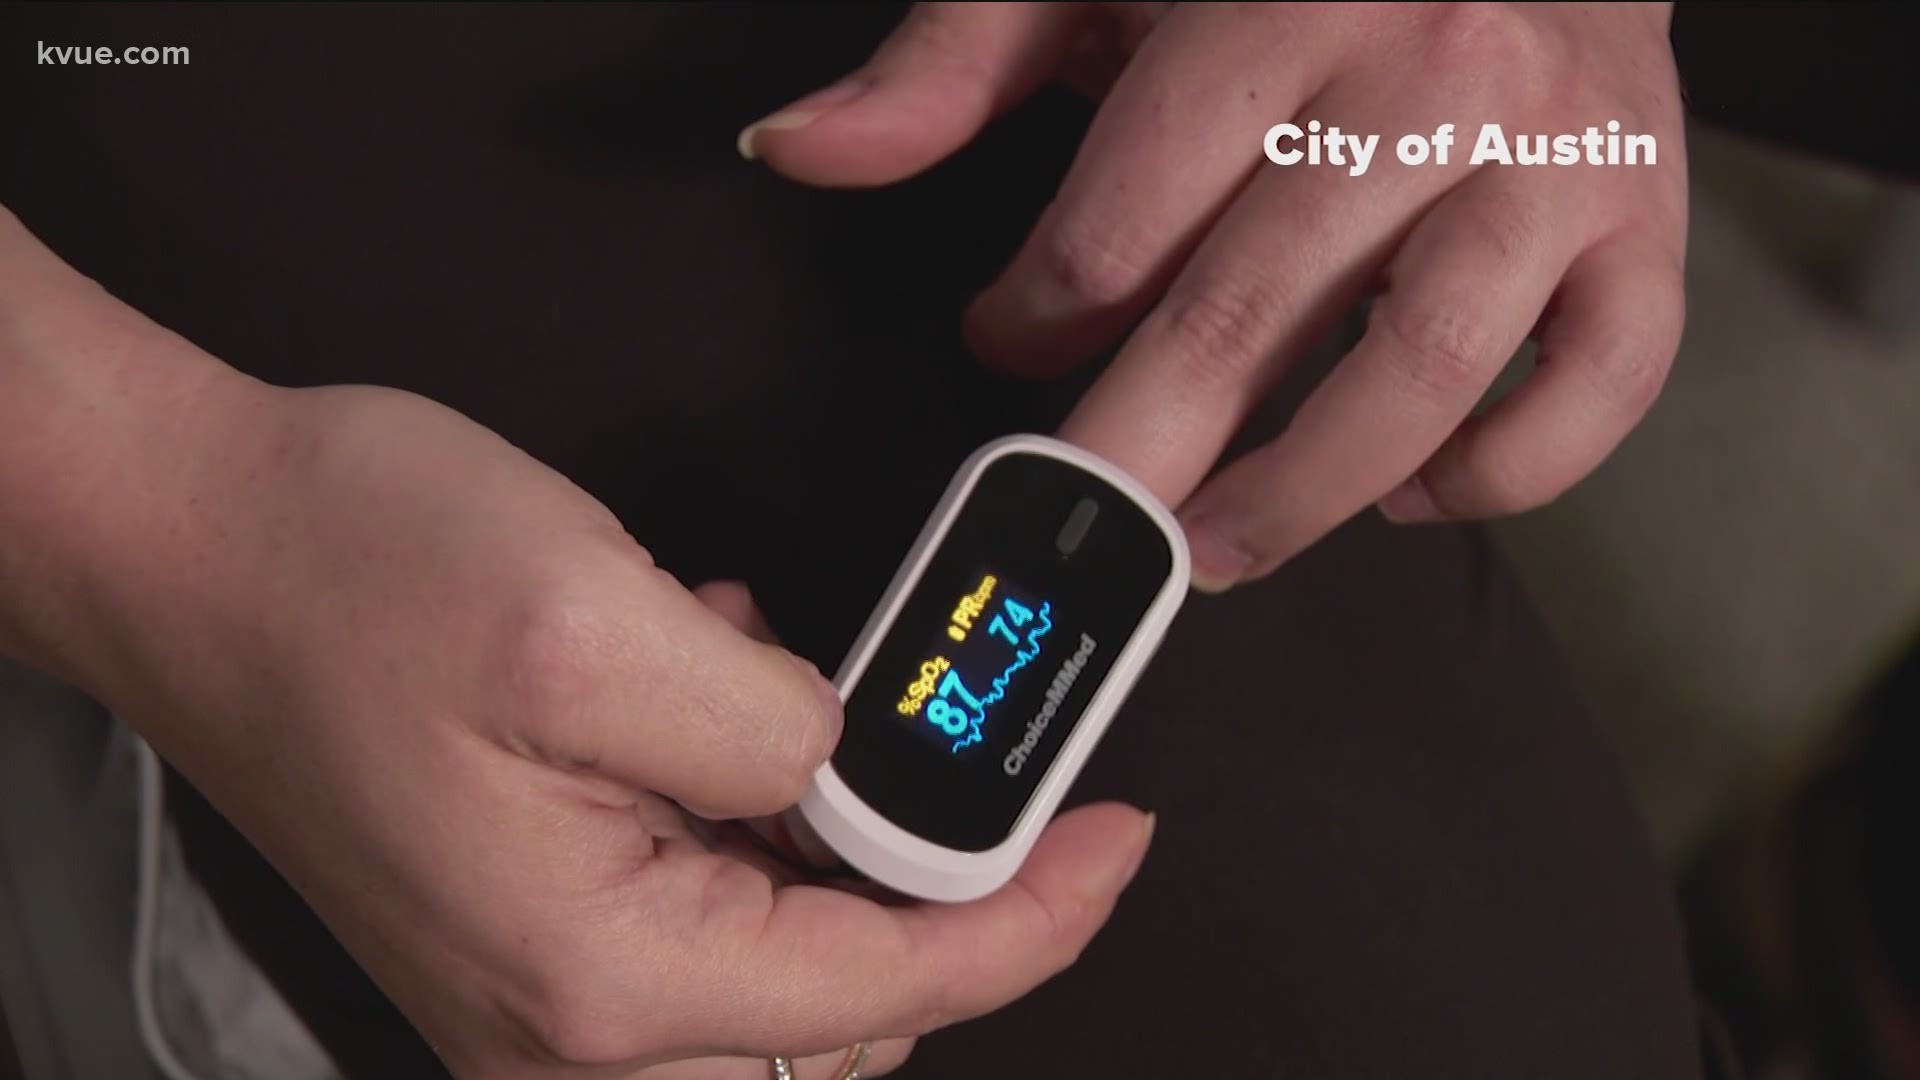 The City is giving out pulse oximeters to COVID-19 patients. But doctors say not everyone needs to rush out and buy one.